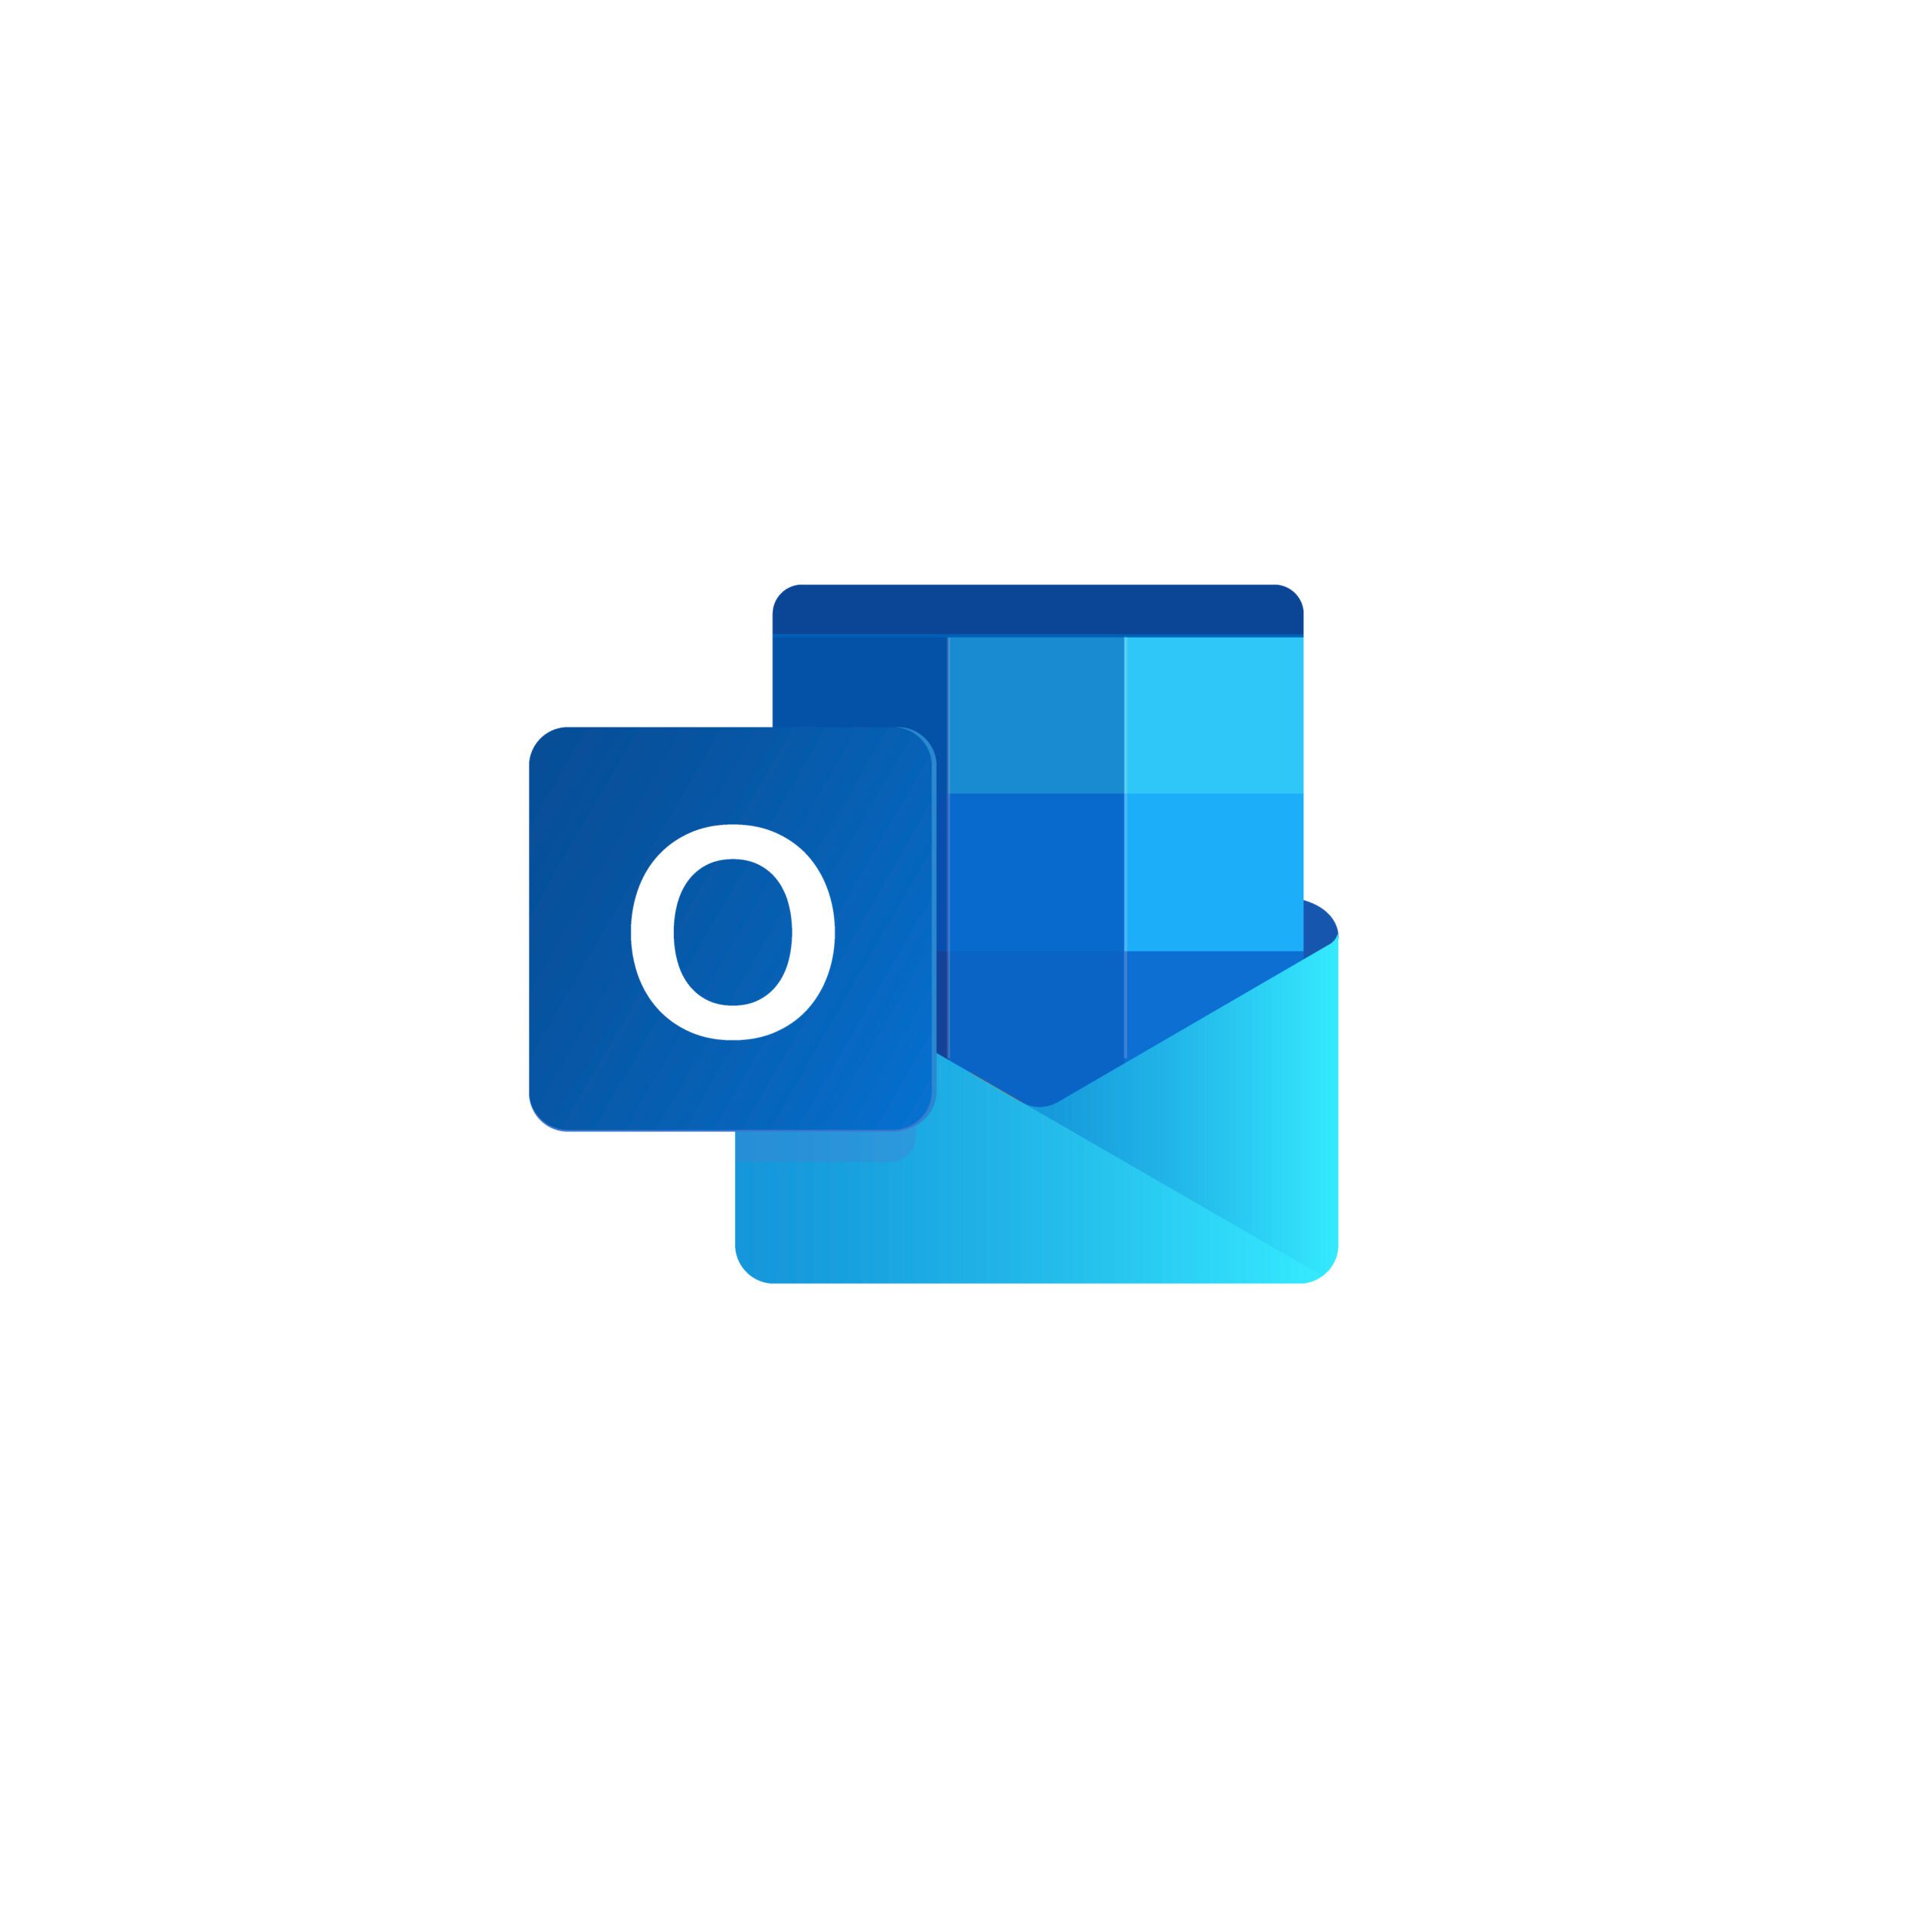 New Microsoft Outlook Changes – Tech Tip For August 3, 2022